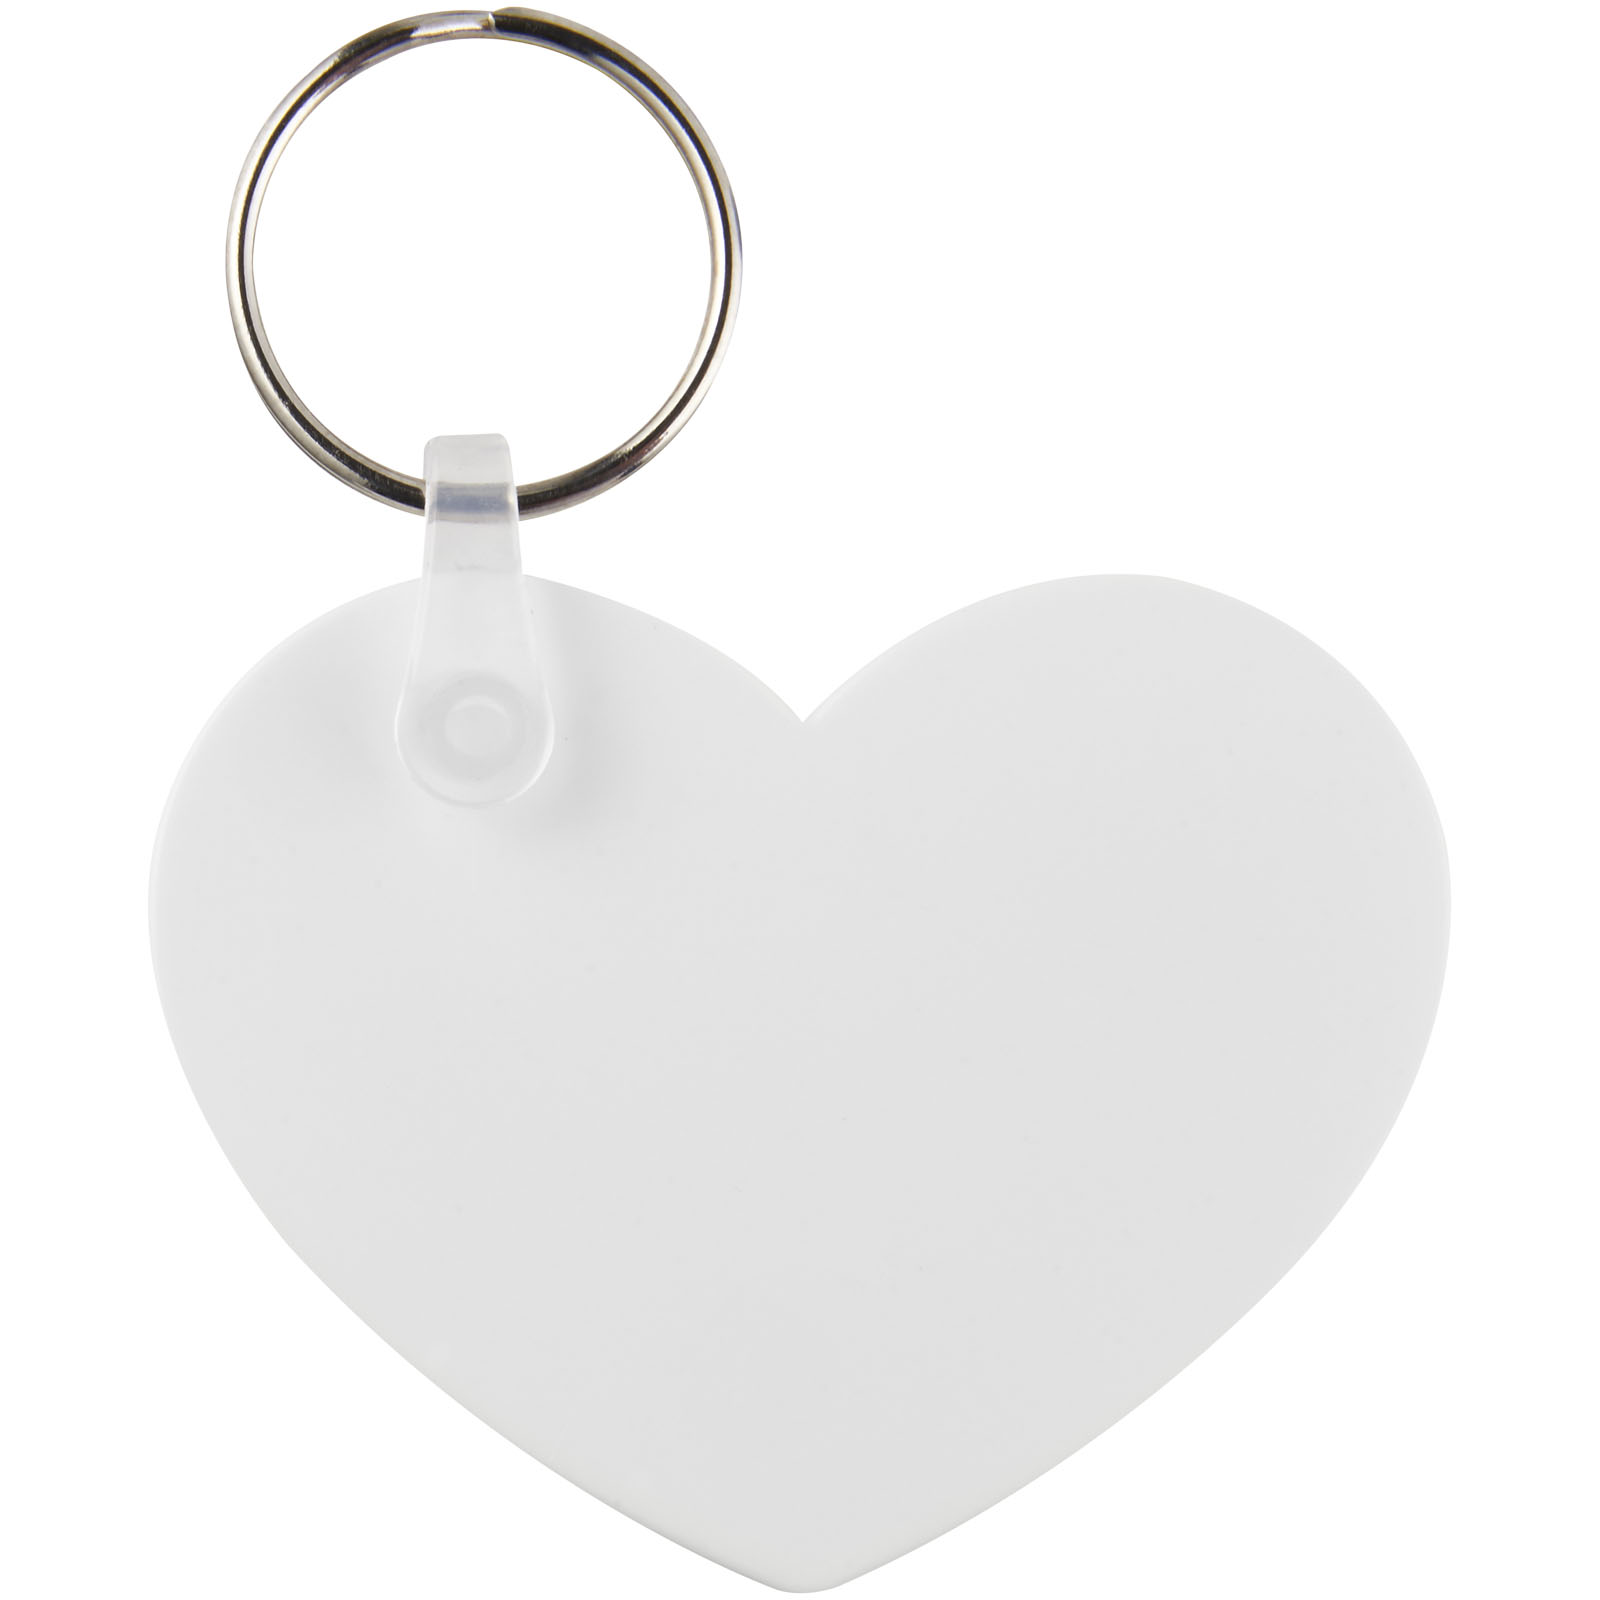 Advertising Keychains & Keyrings - Tait heart-shaped recycled keychain - 1